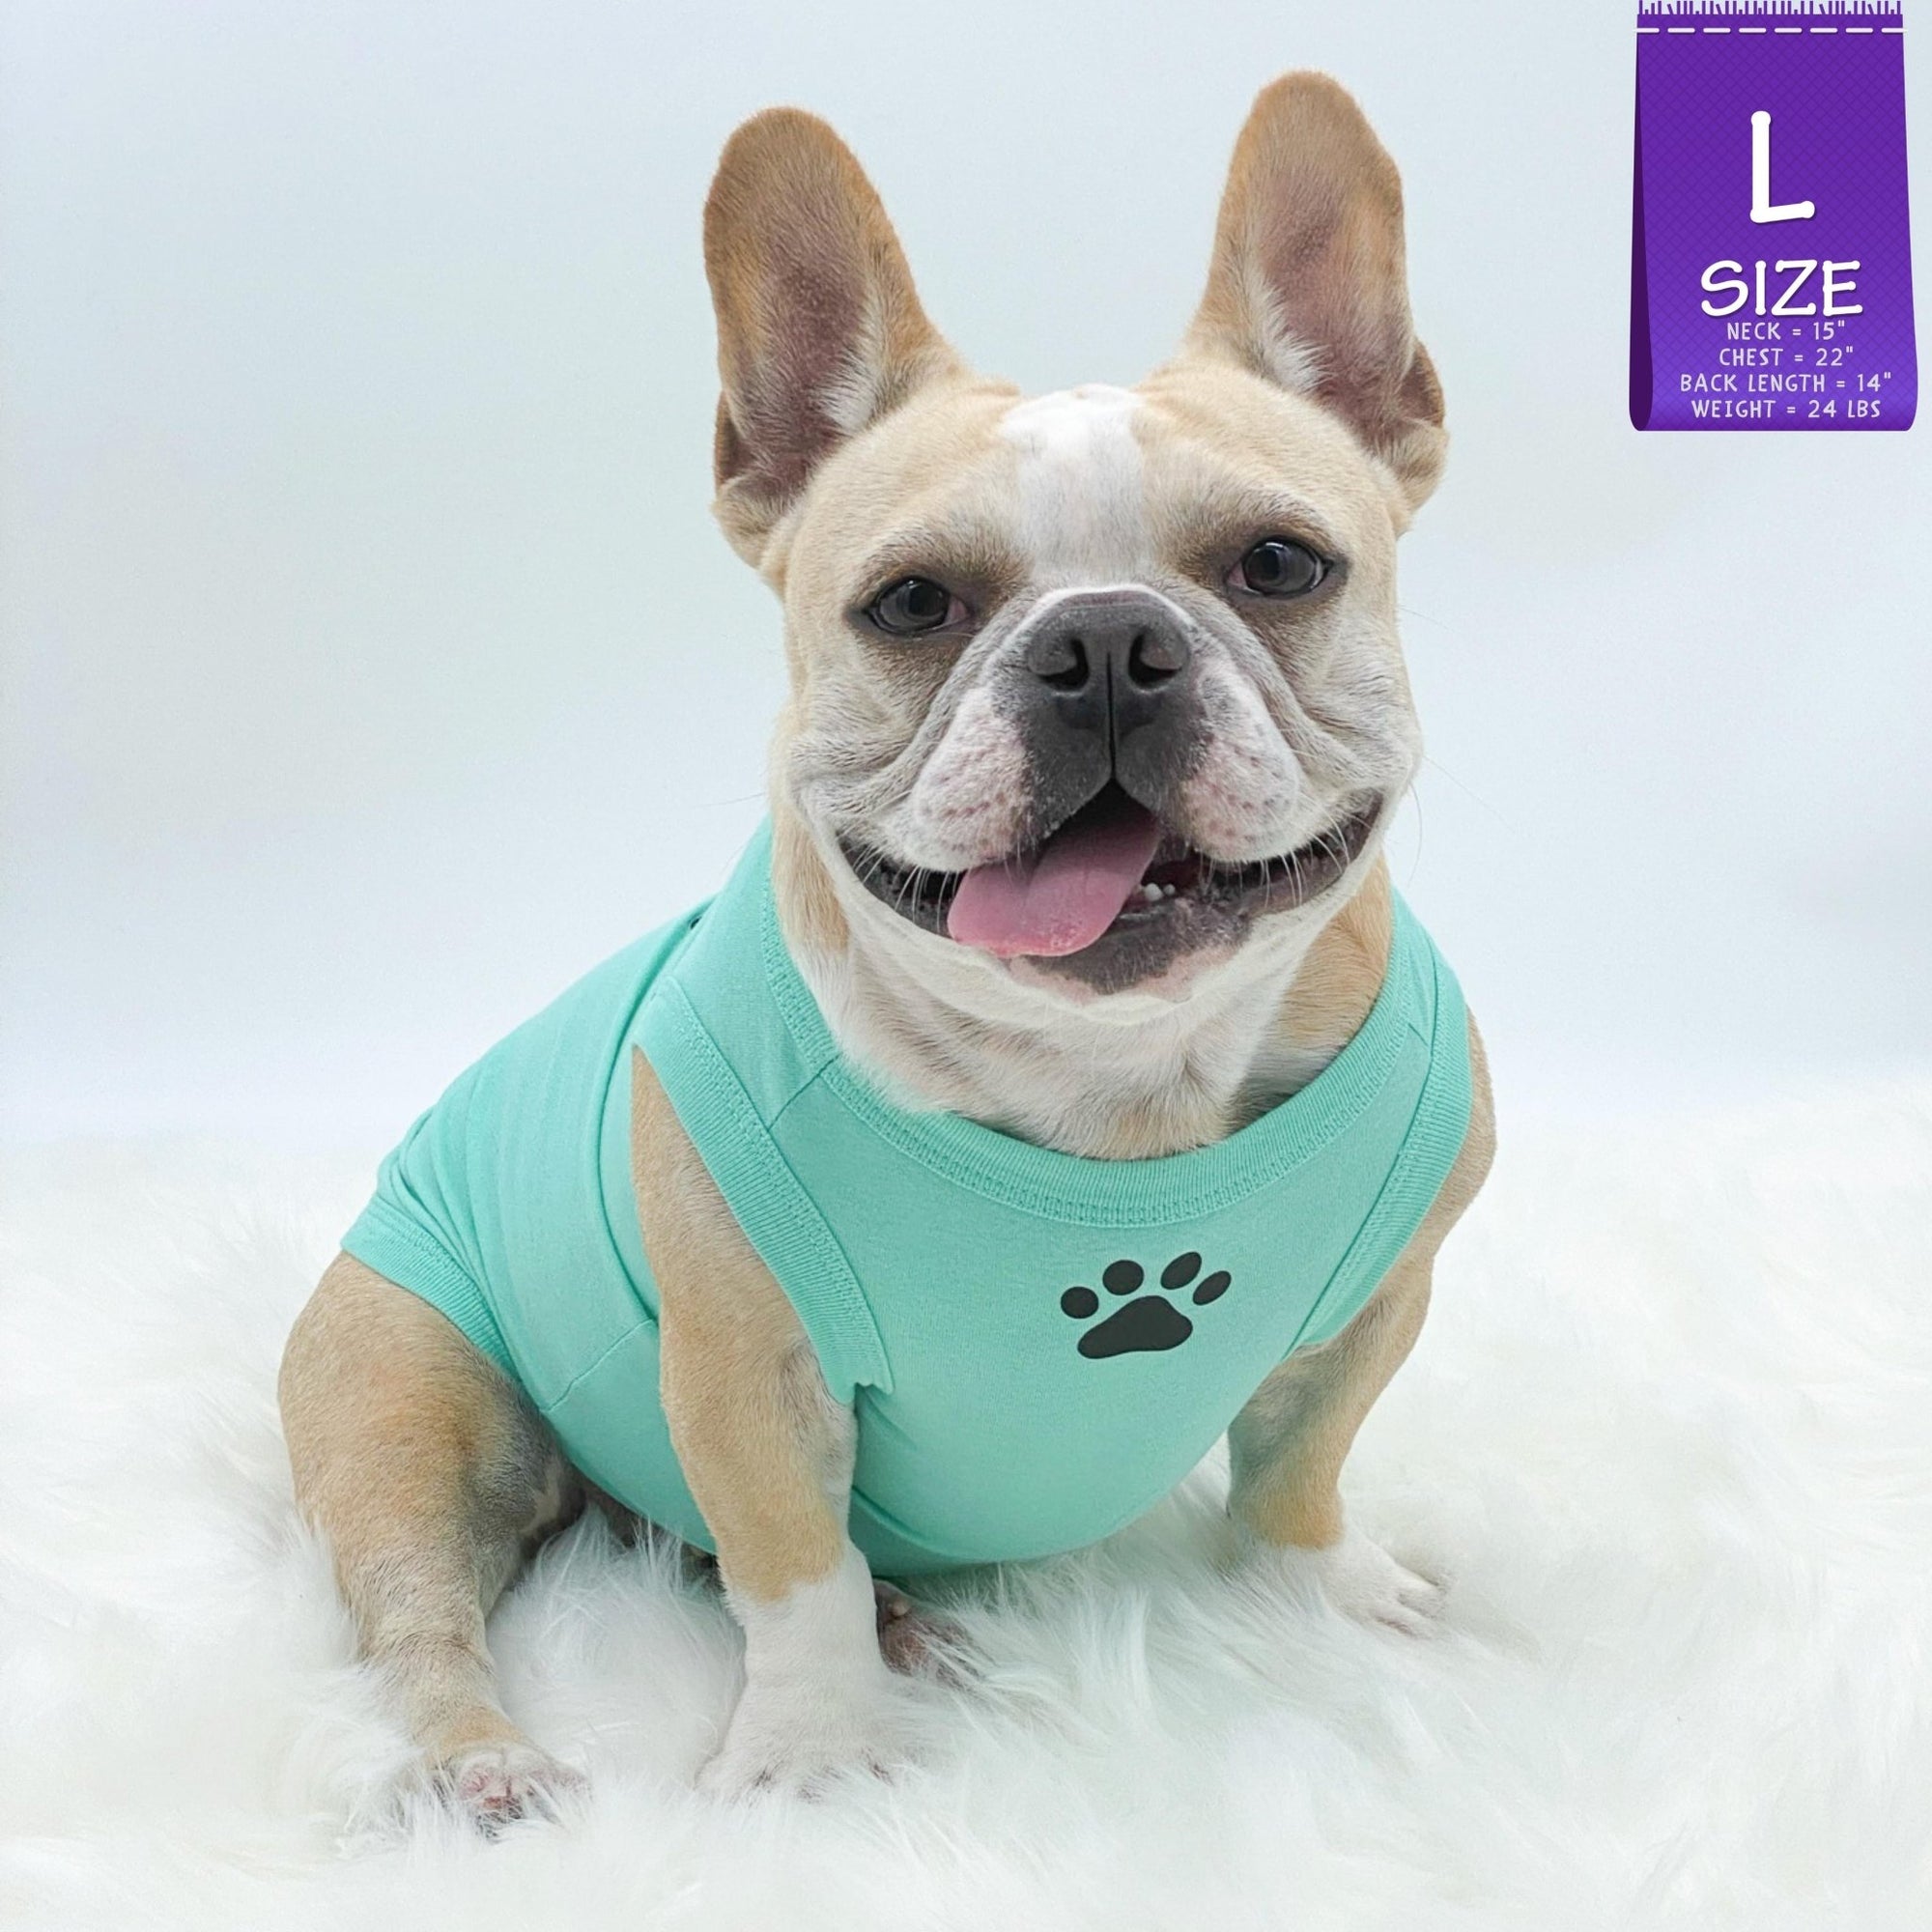 Dog T-Shirt - French Bulldog wearing &quot;Stay Pawsitive&quot; teal dog t-shirt - with paw print emoji in black on chest - against solid white background - Wag Trendz